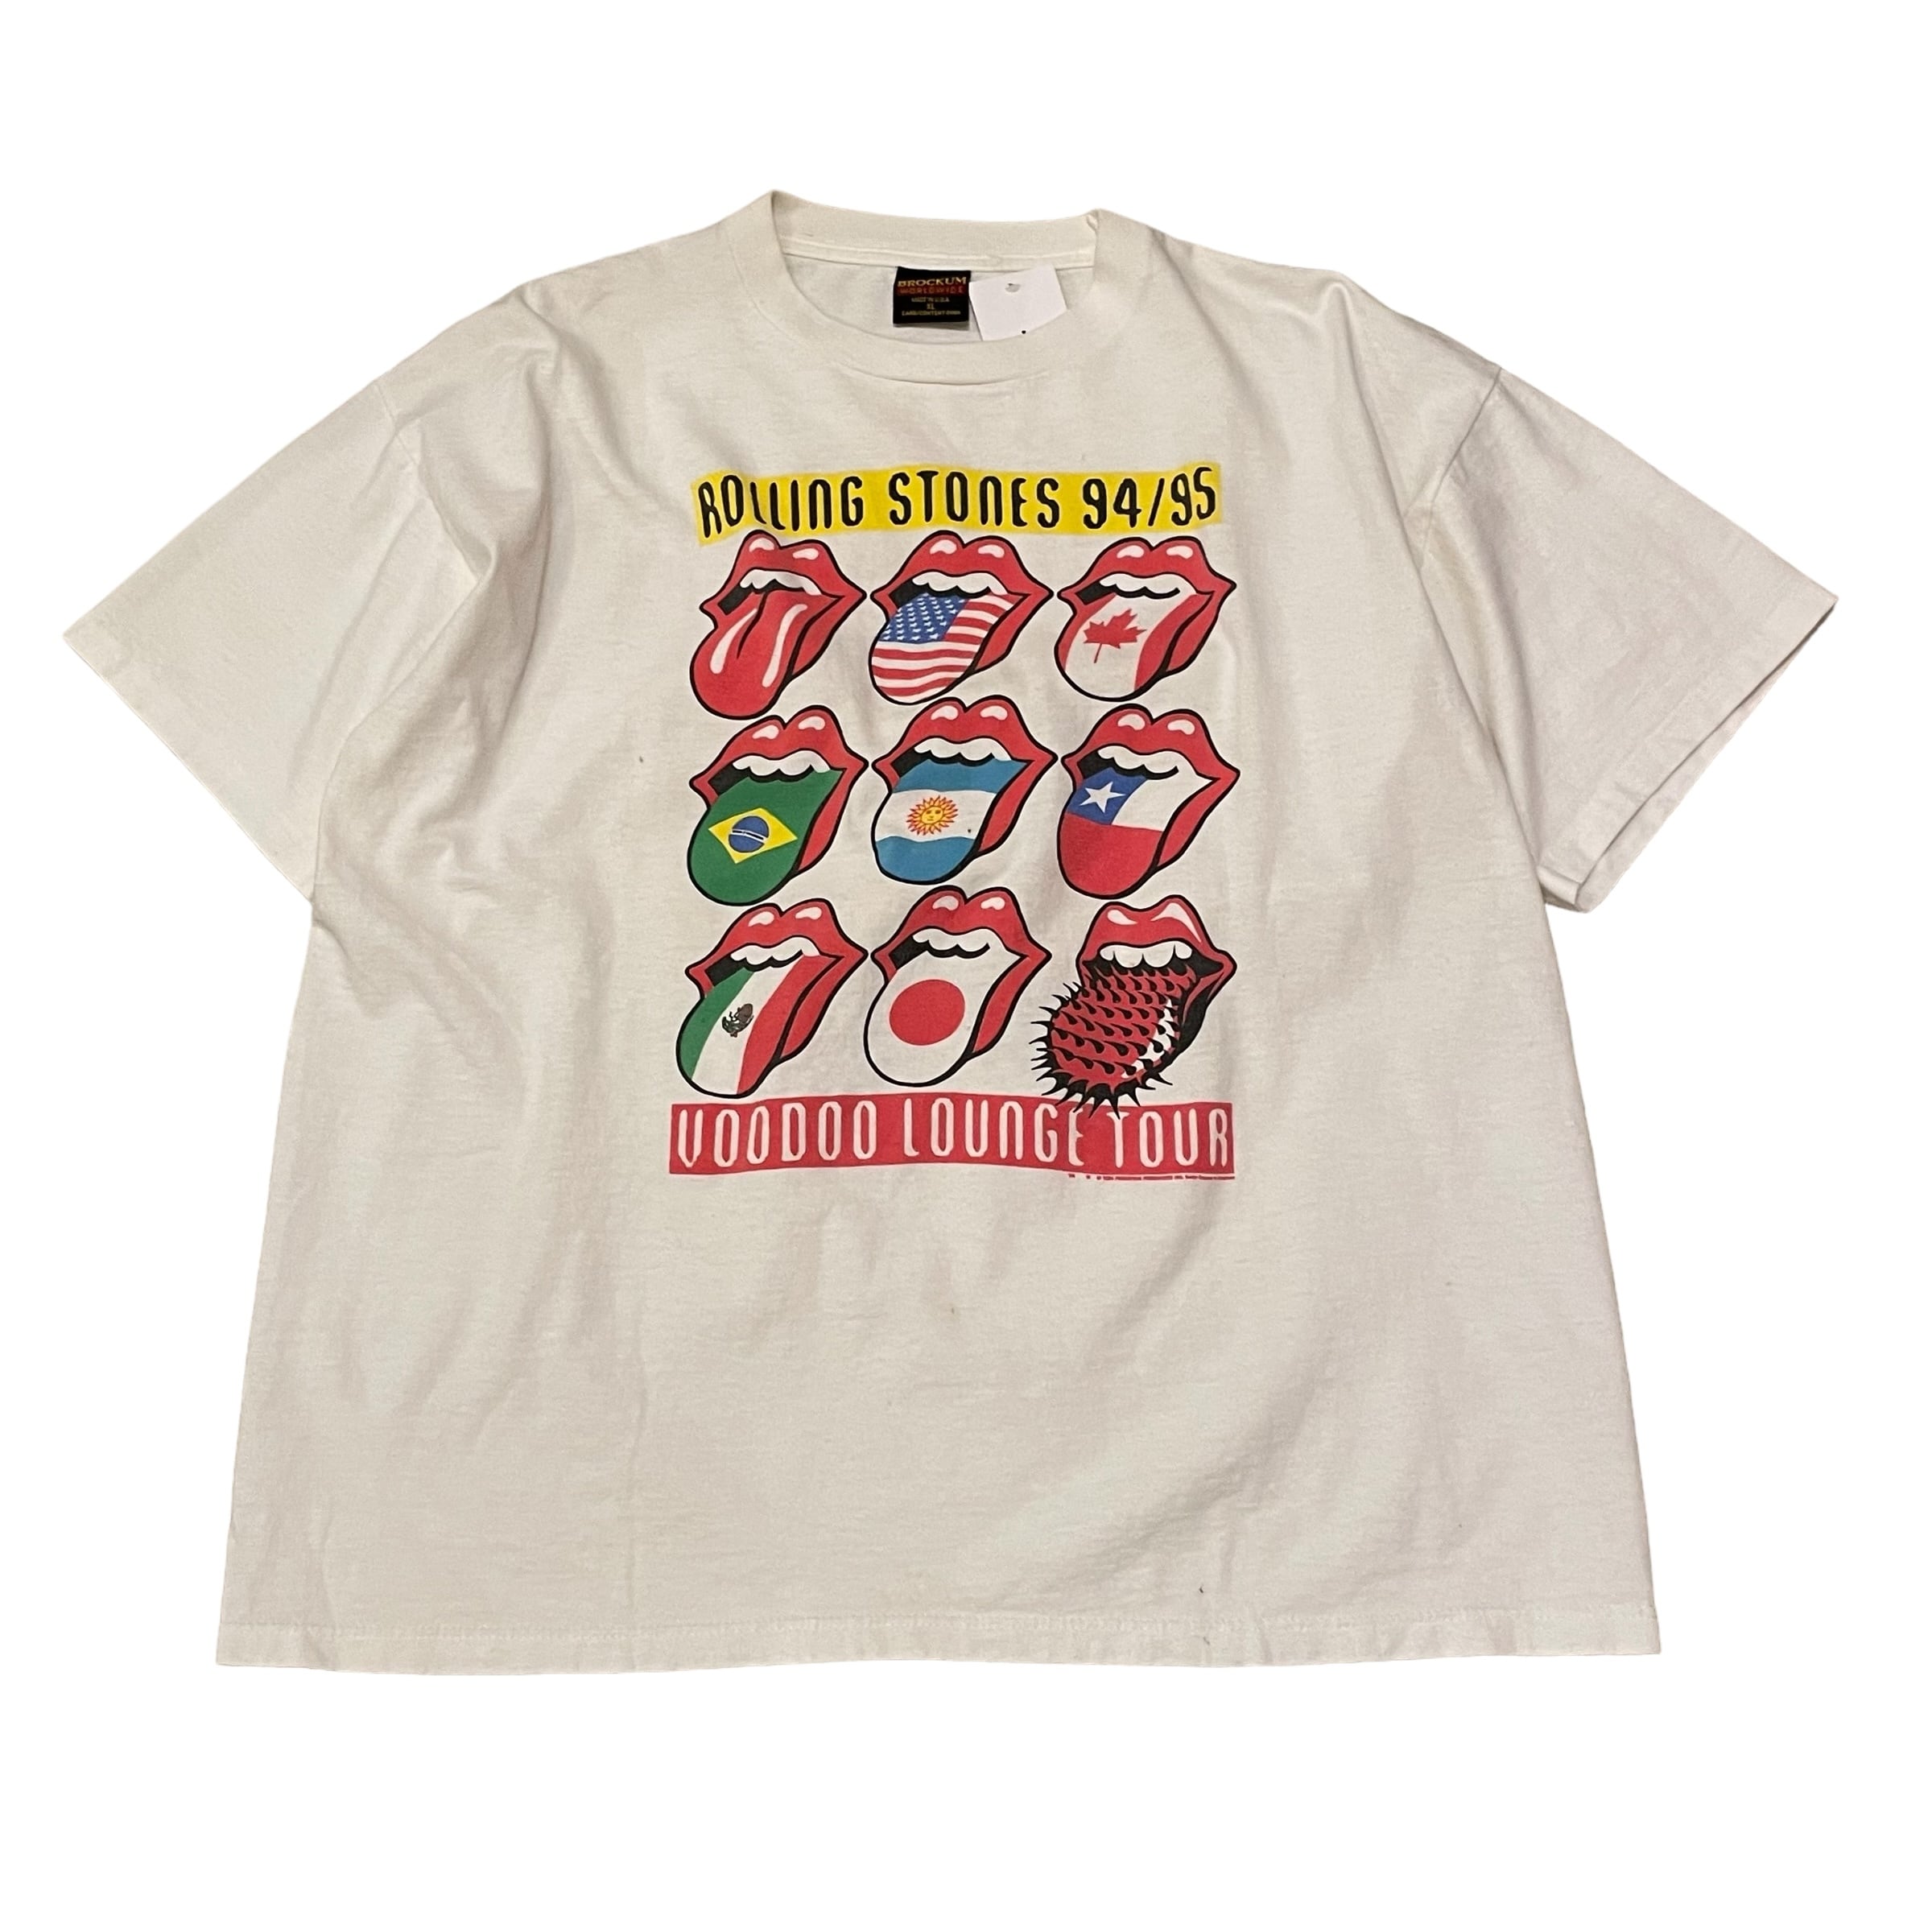 90s ROLLING STONES “VOODOO LOUNGE TOUR“ t-shirt | What’z up powered by BASE